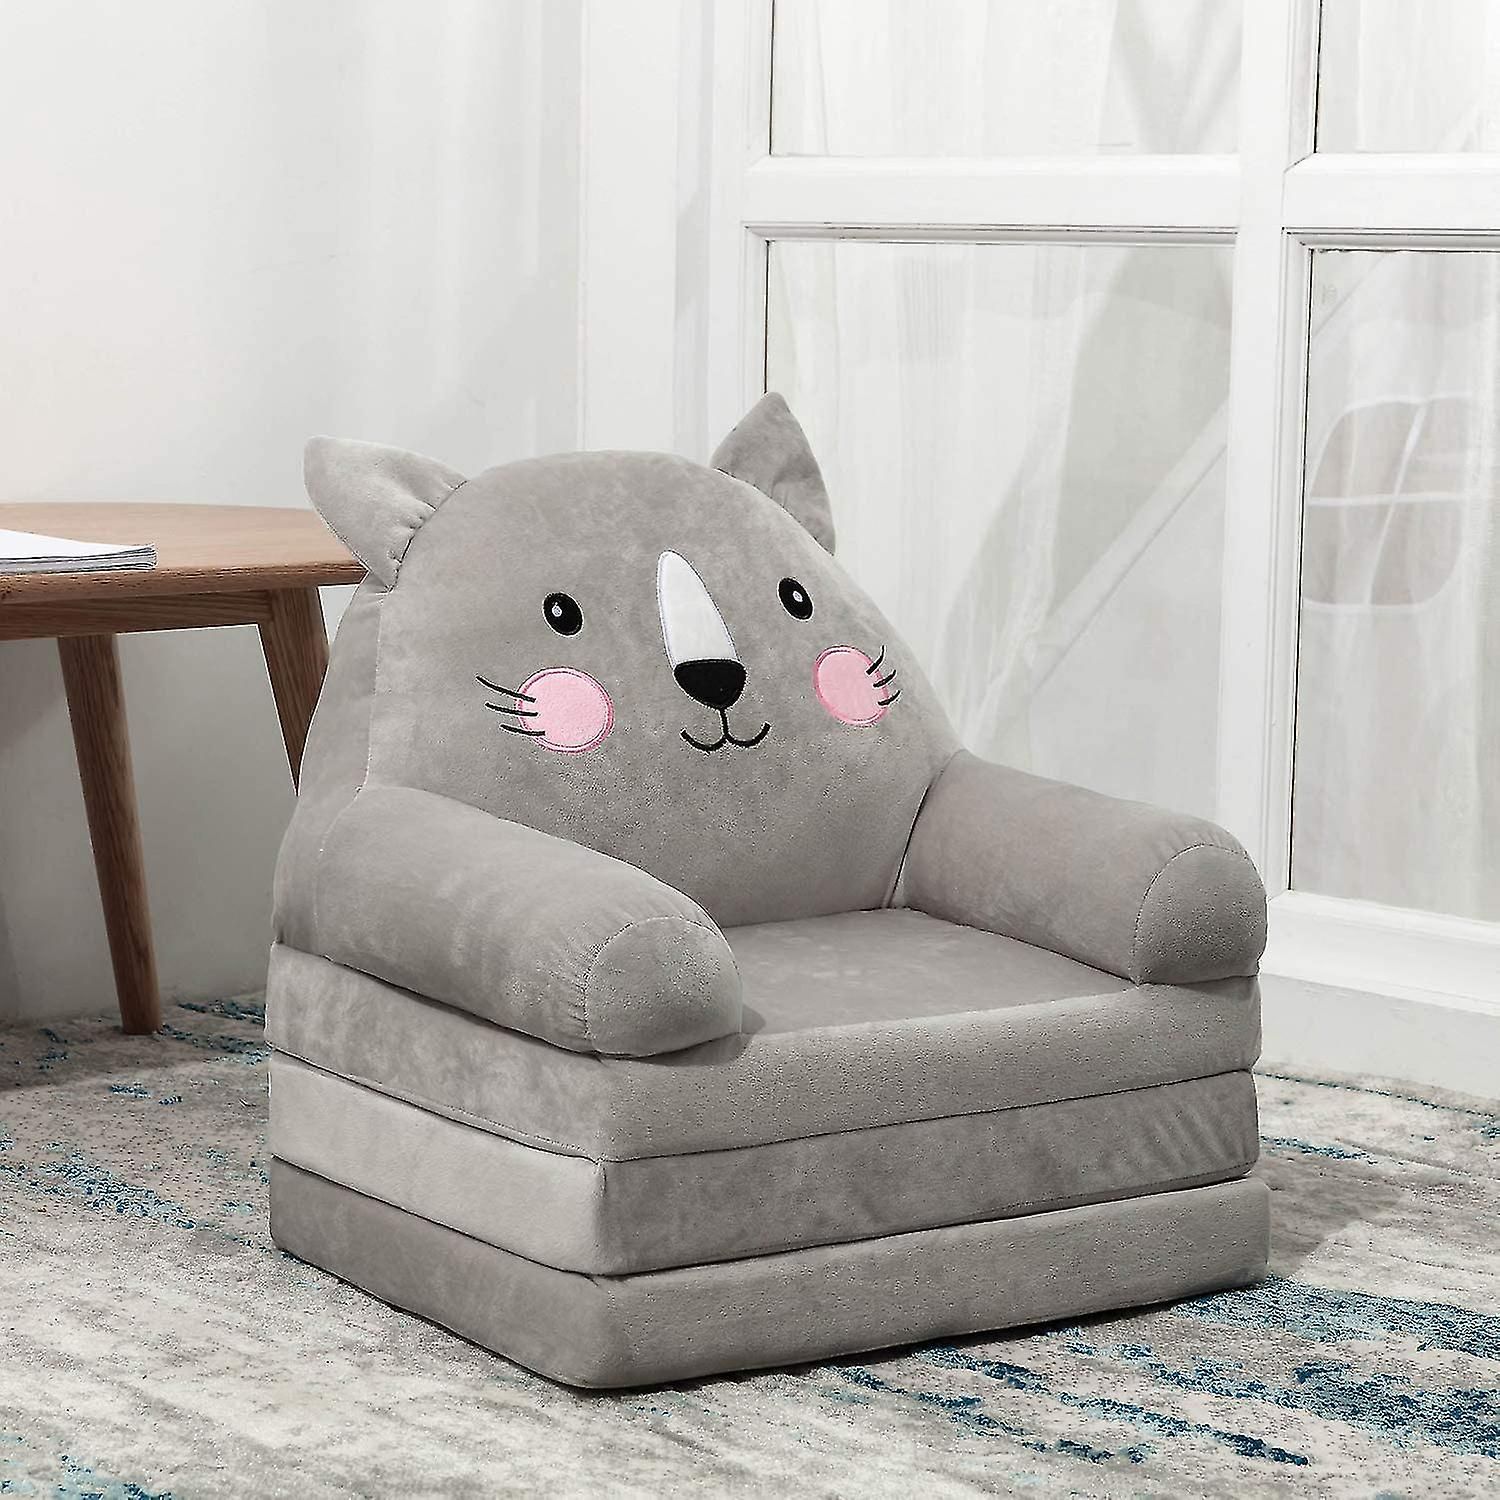 Cartoon Foldable Kids Sofa, Plush Cat Shape Children Couch Backrest Armchair  Bed With Pocket, Upholstered 2 In 1 Flip Open Couch | Fruugo Fr Throughout 2 In 1 Foldable Children's Sofa Beds (Photo 1 of 15)